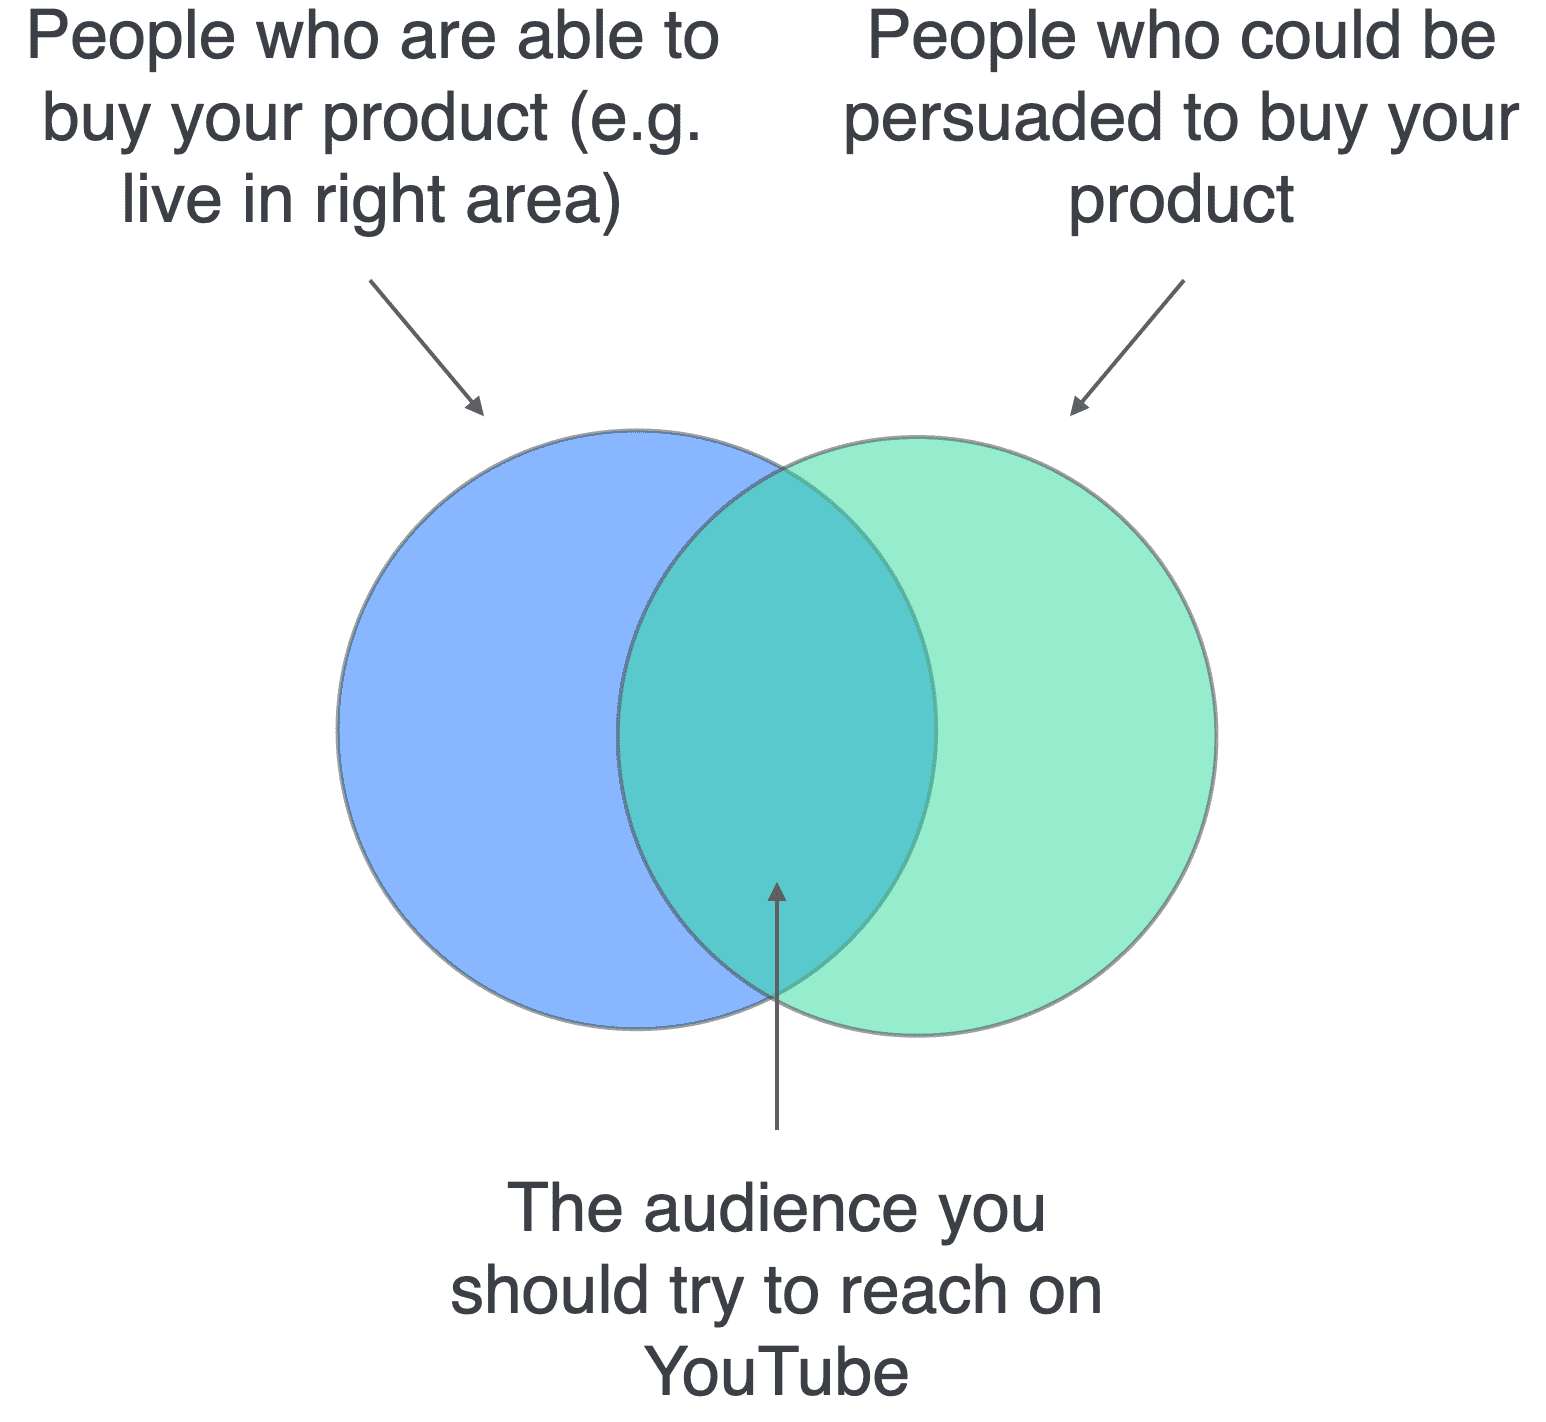 Venn diagram showing that you need to reach people who both are able to buy your product, and could be persuaded to do so